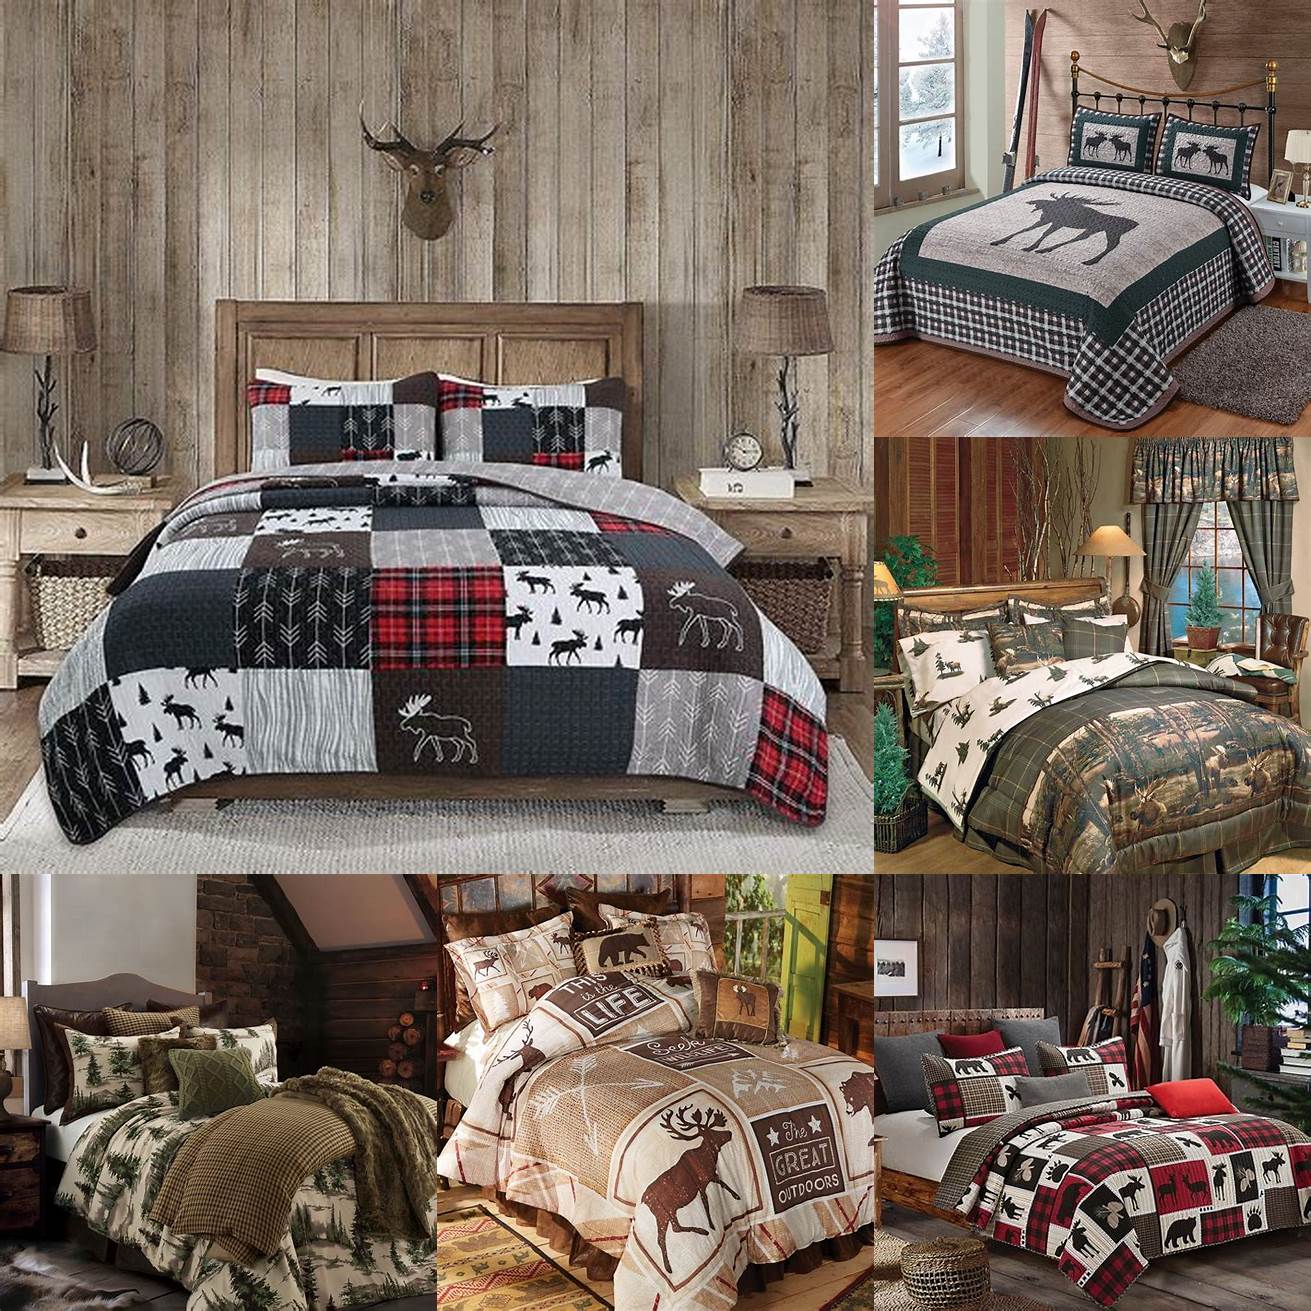 Moose-themed cabin bedding is perfect for a cabin or vacation home